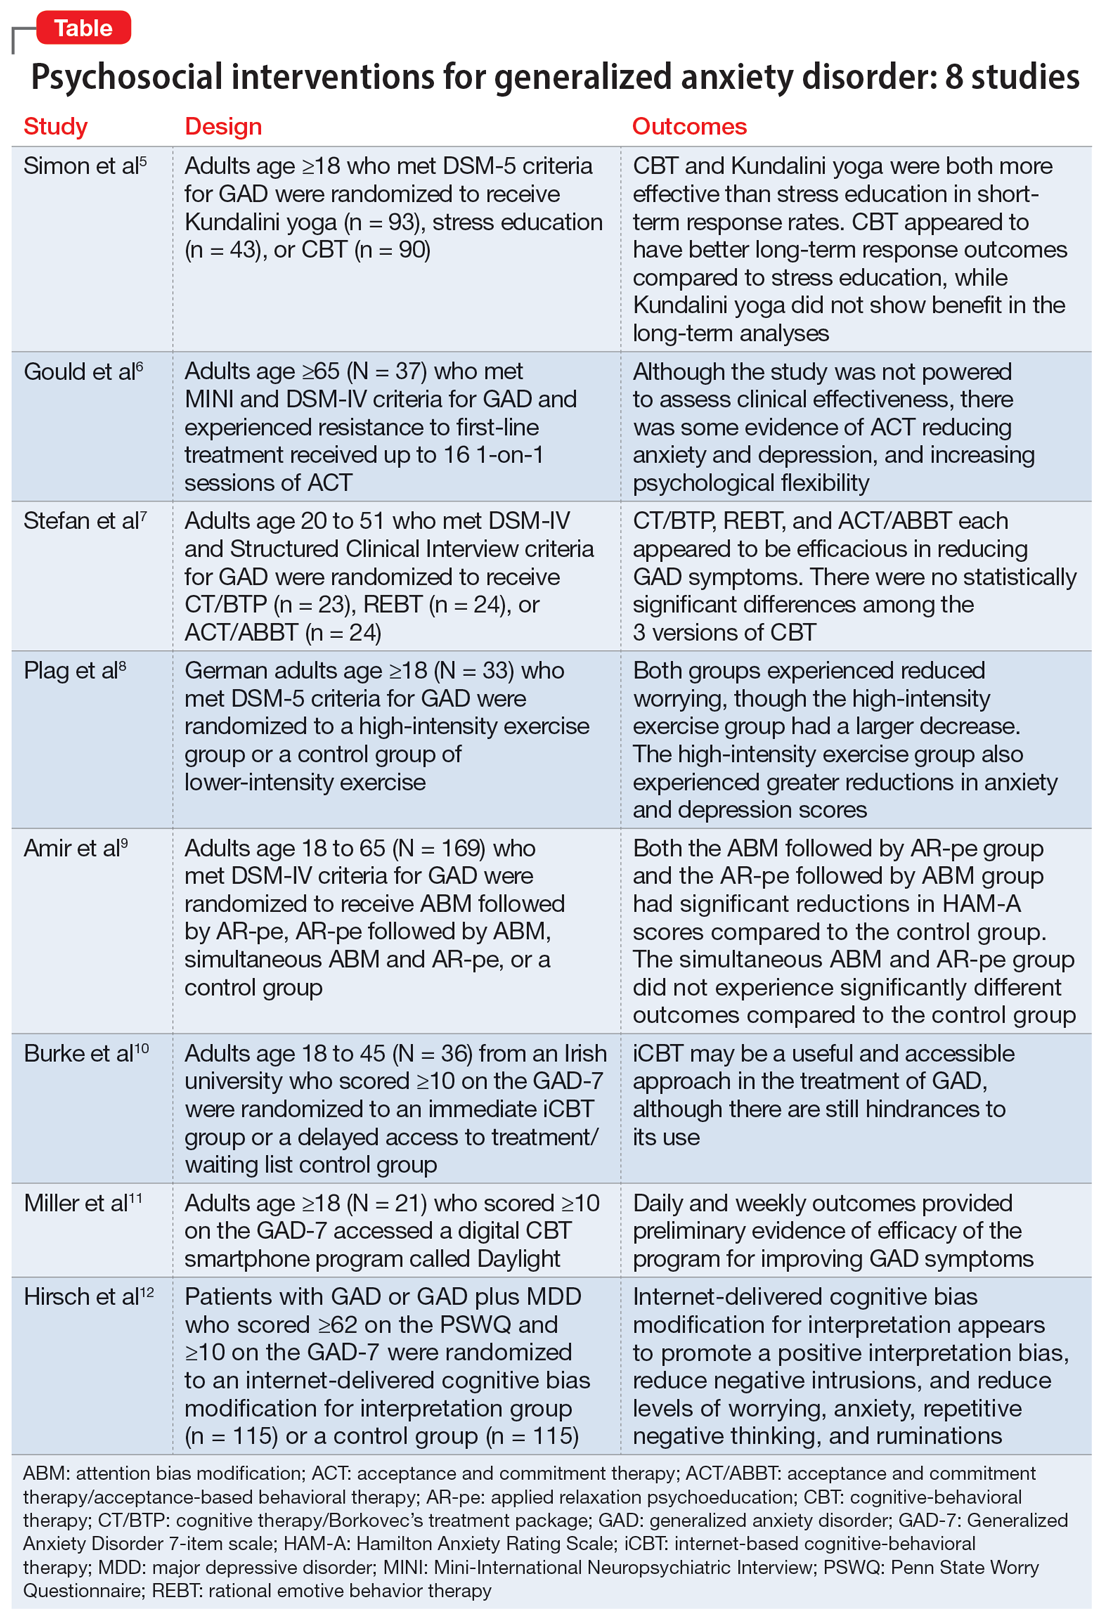 Psychosocial interventions for generalized anxiety disorder: 8 studies